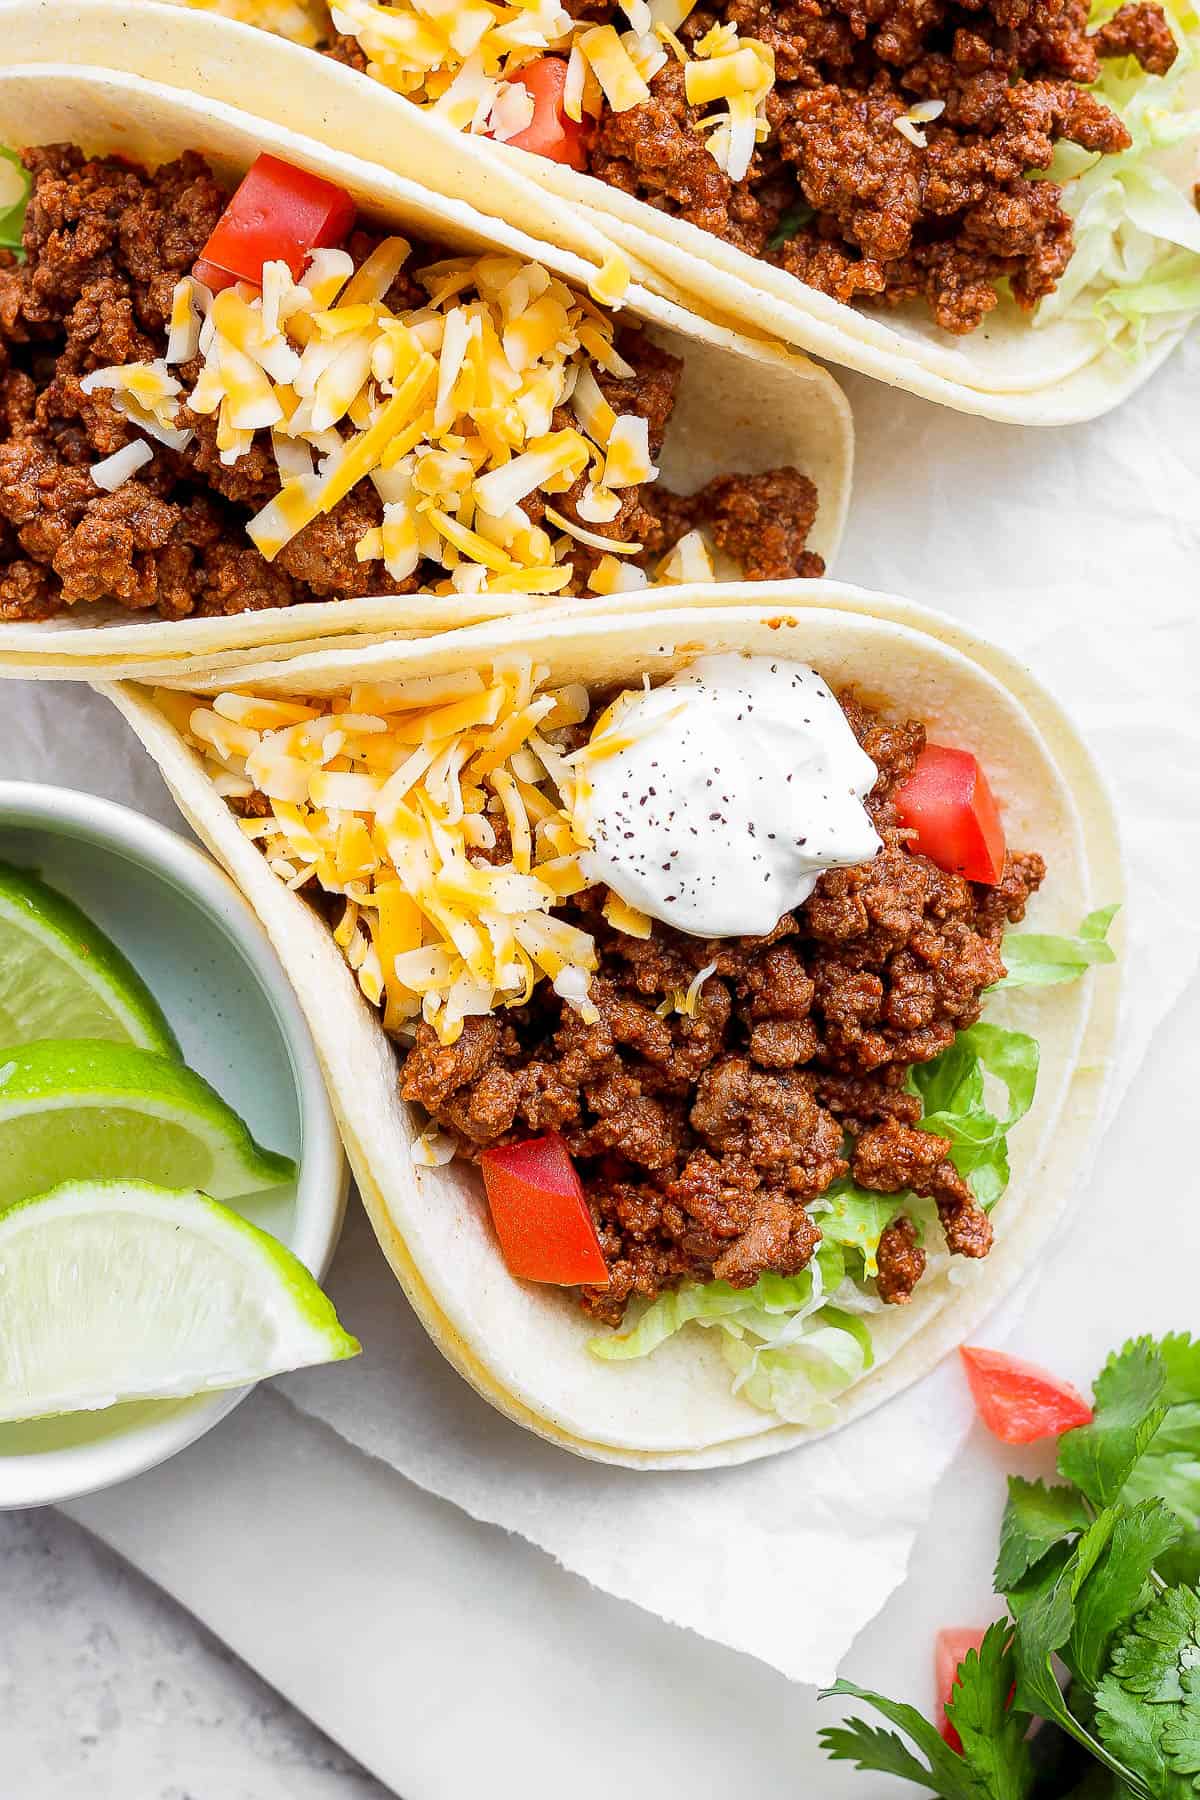 Ground beef tacos topped with shredded cheese, sour cream, and diced tomatoes.